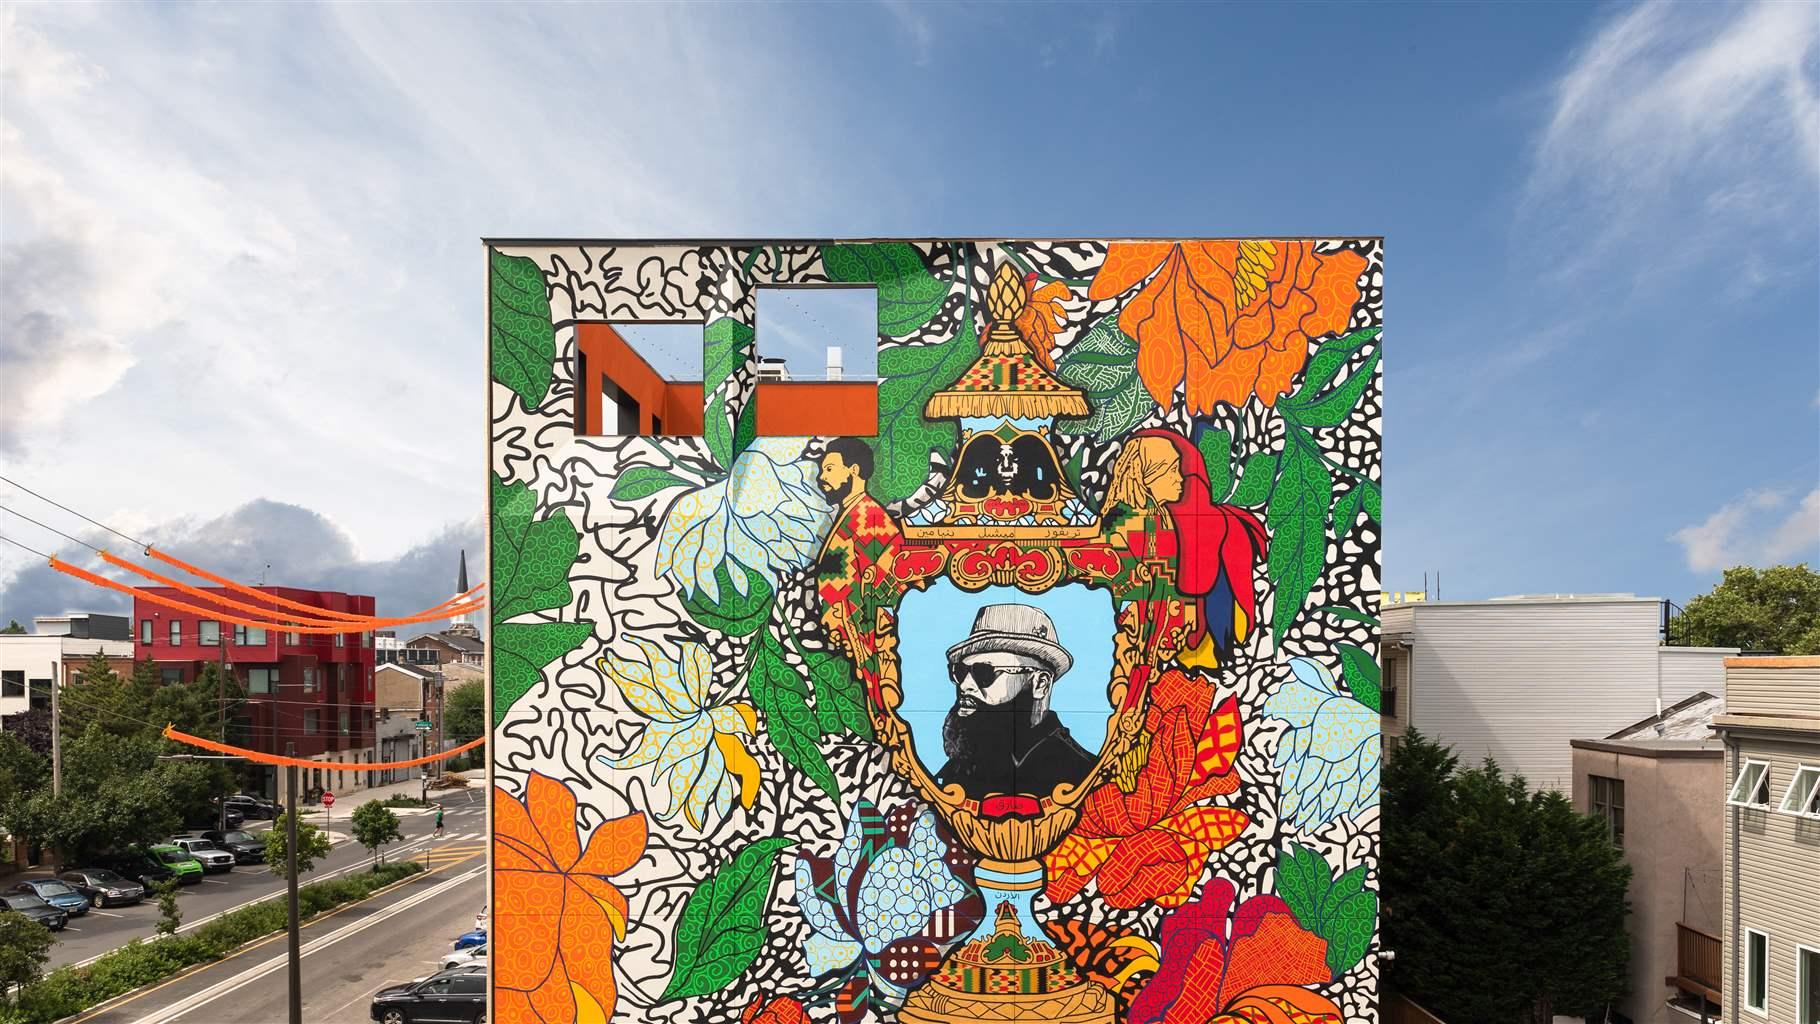 A mural by Roberto Lugo, a ceramist and 2019 Pew Fellow in the Arts, adorns The Clay Studio’s building in Philadelphia. 